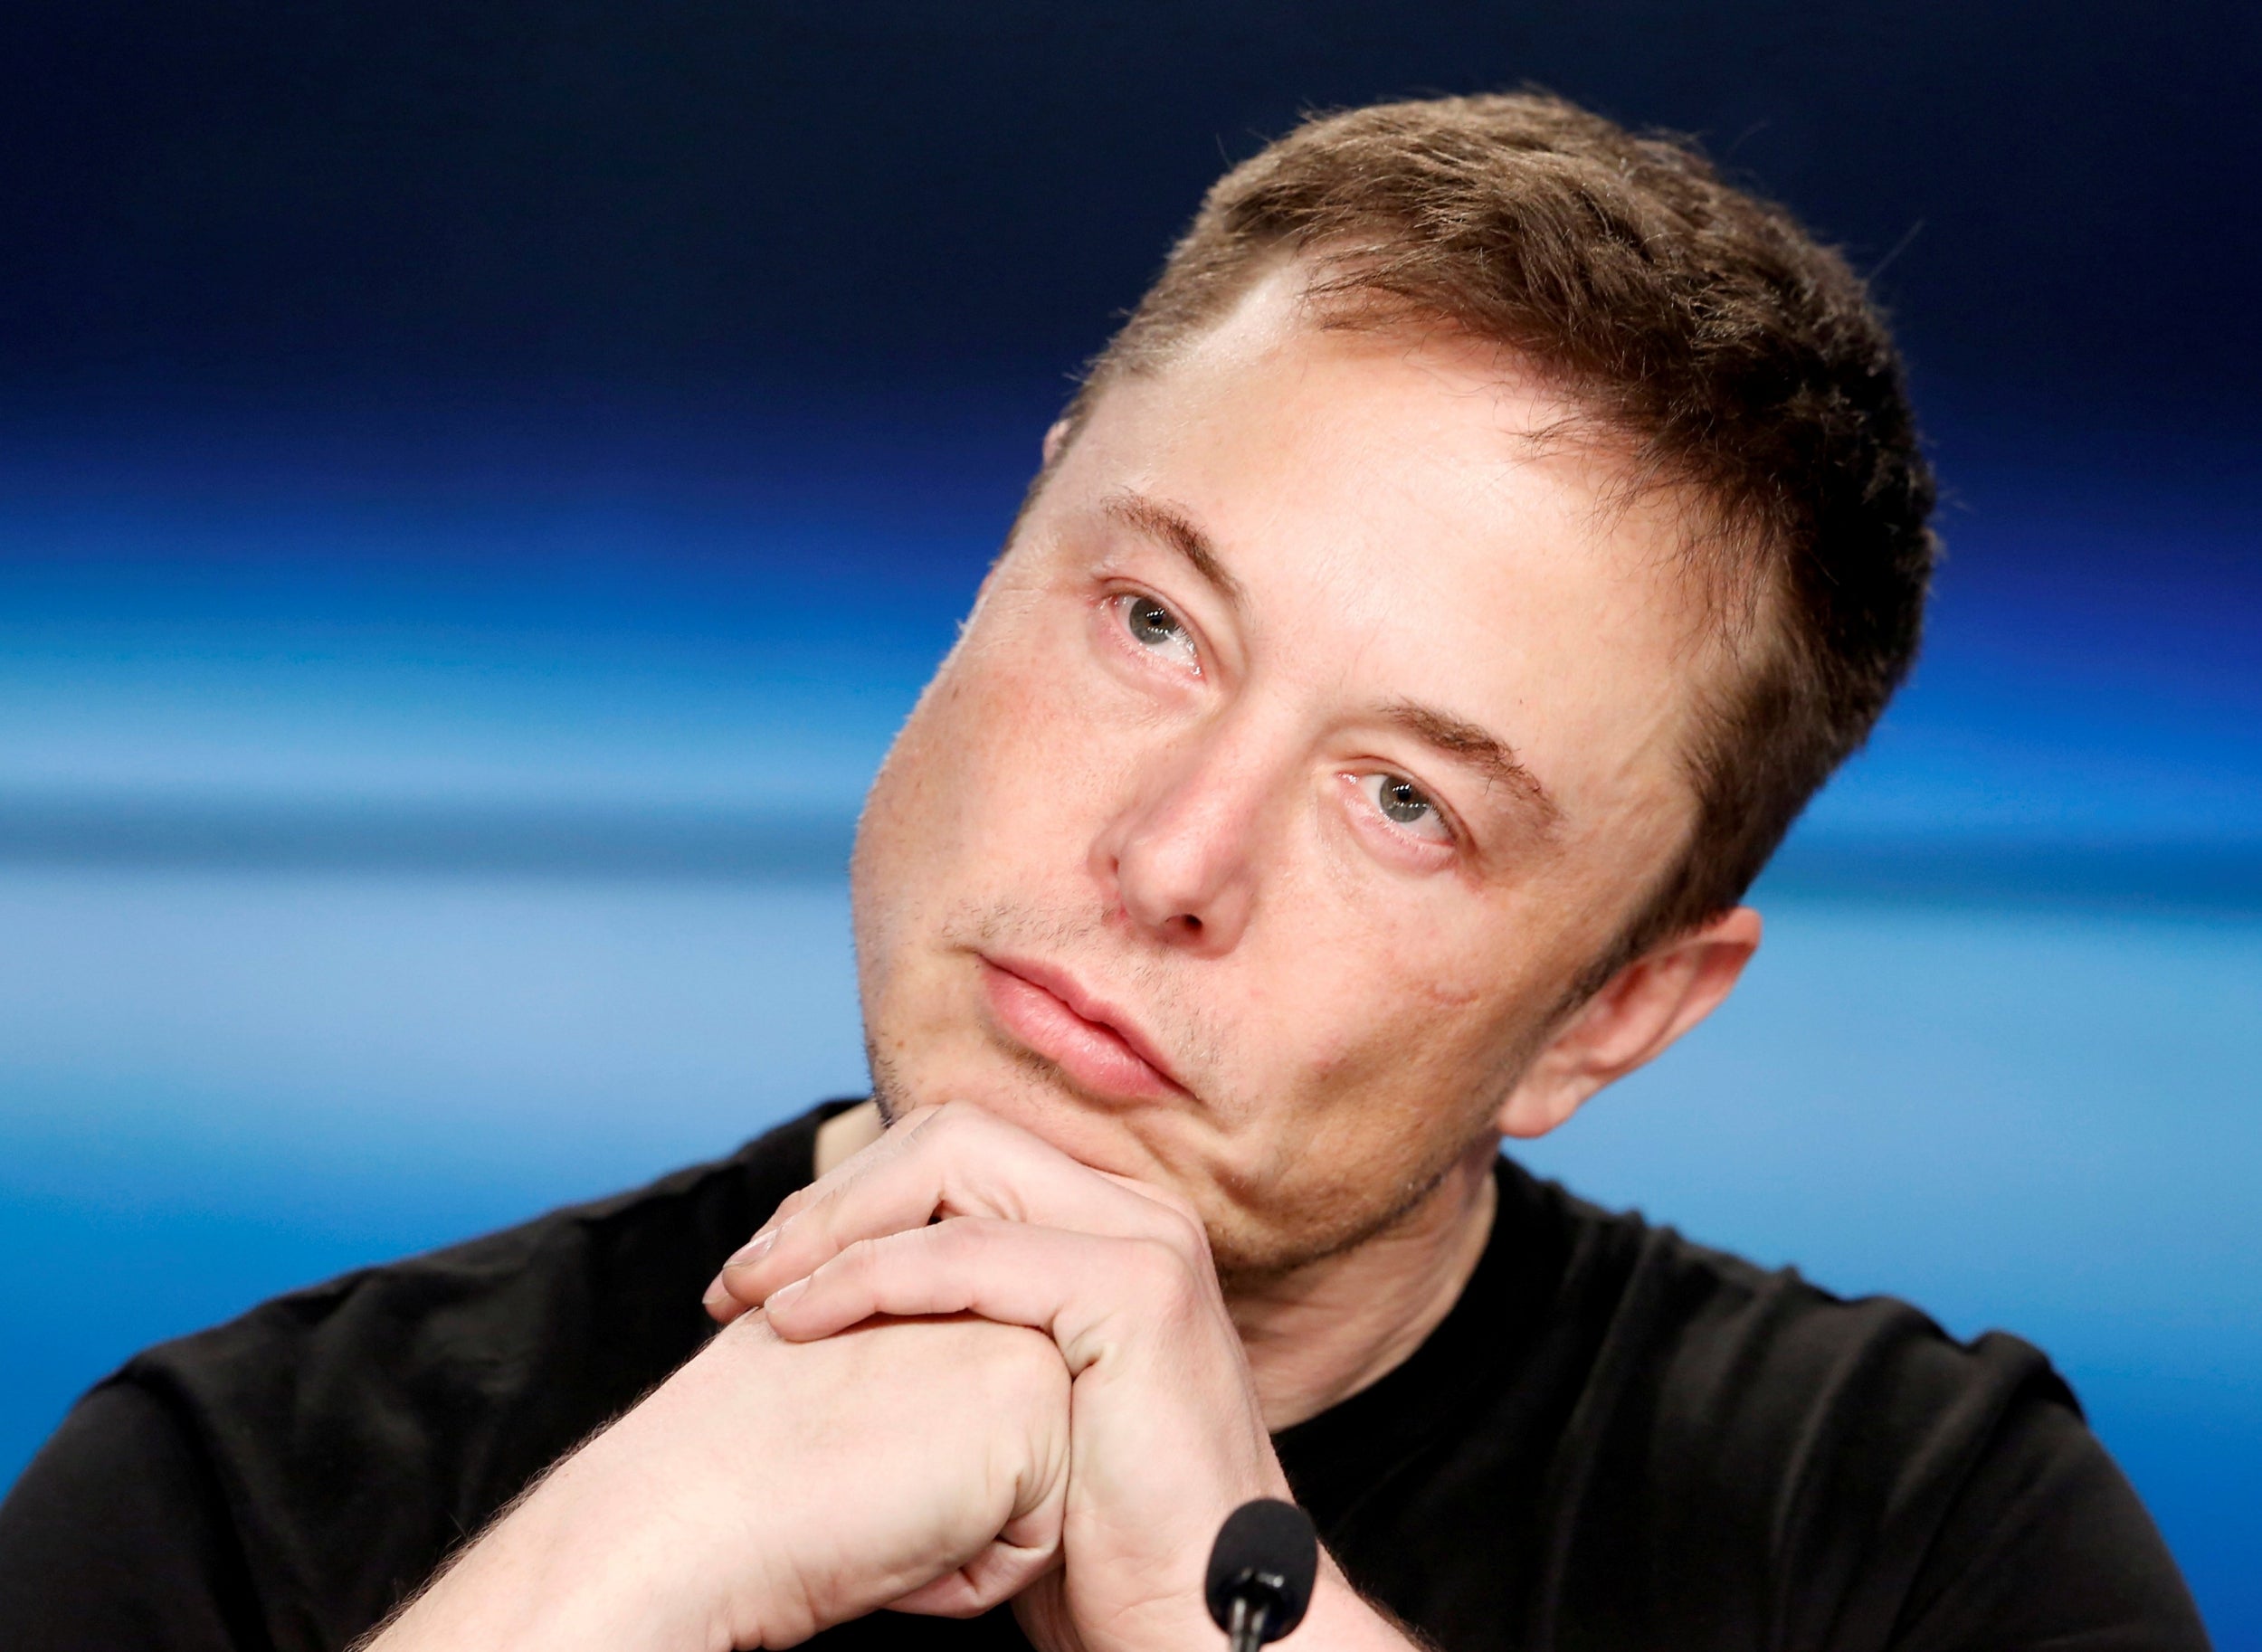 Tesla founder and CEO Elon Musk